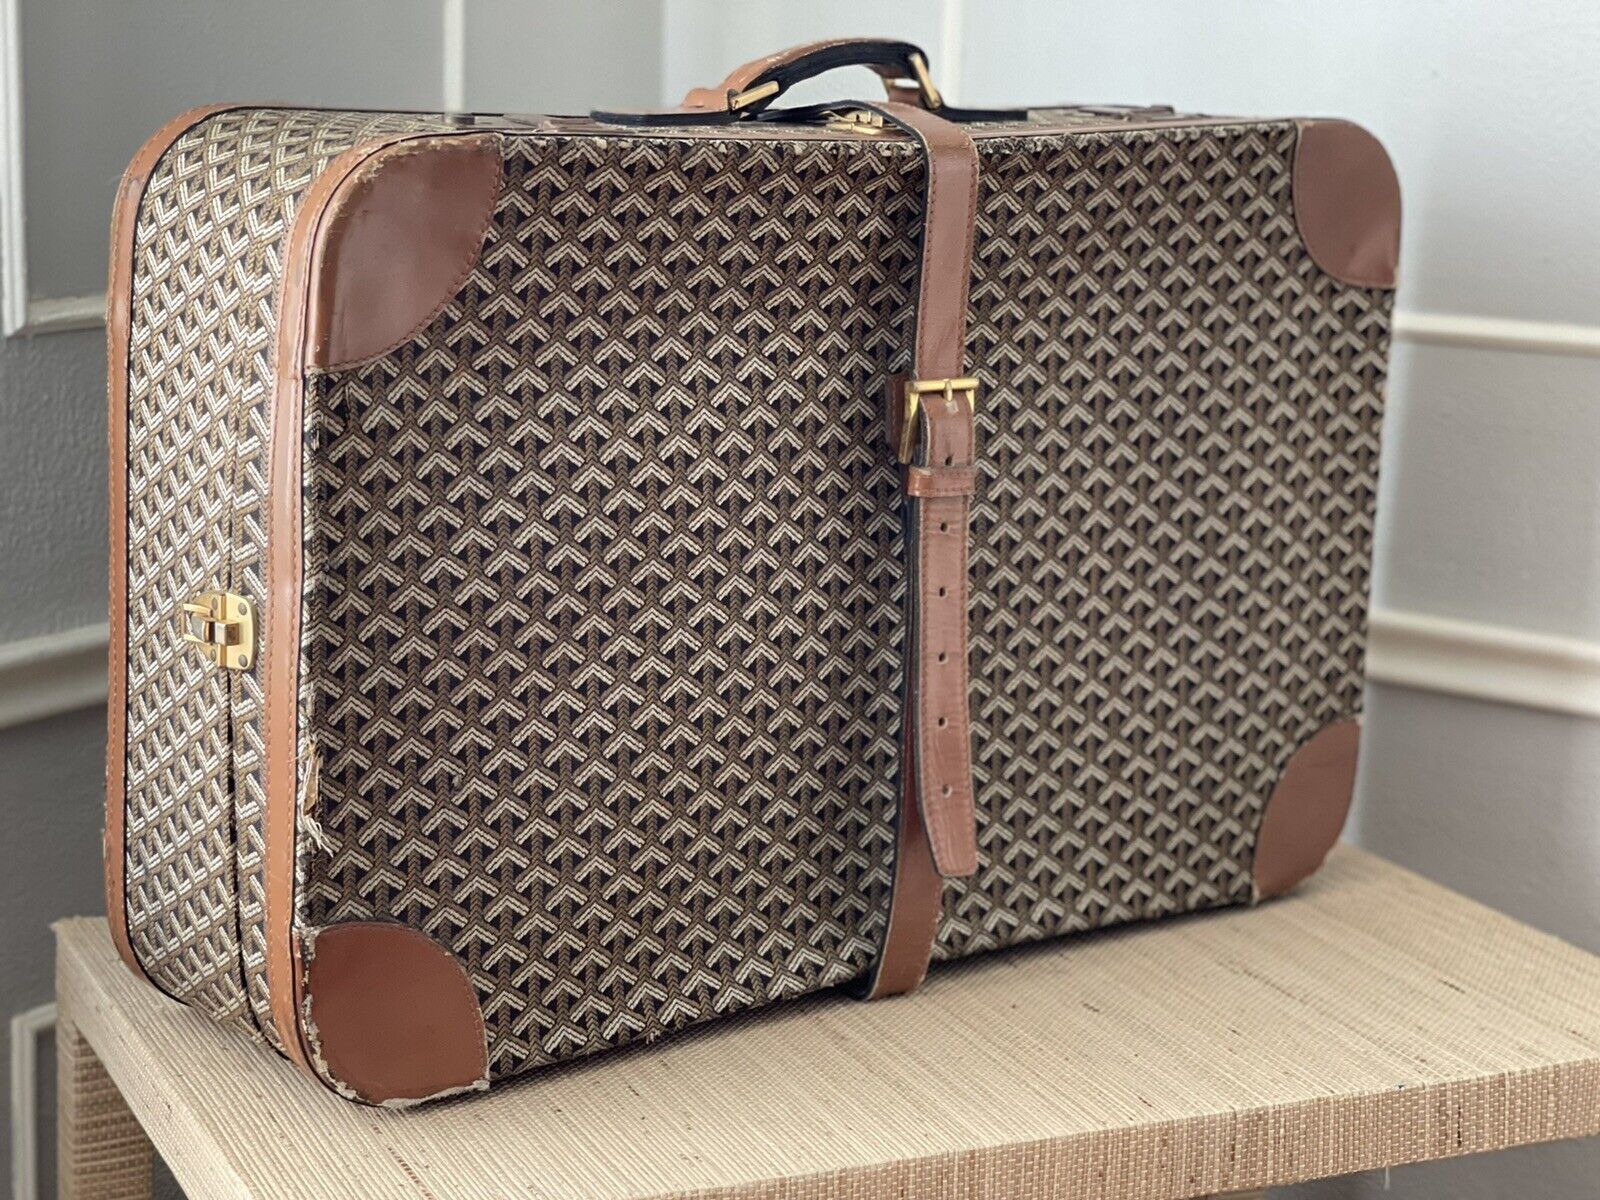 Goyard Suitcase Trunk With Leather Buckle Straps Rare Design